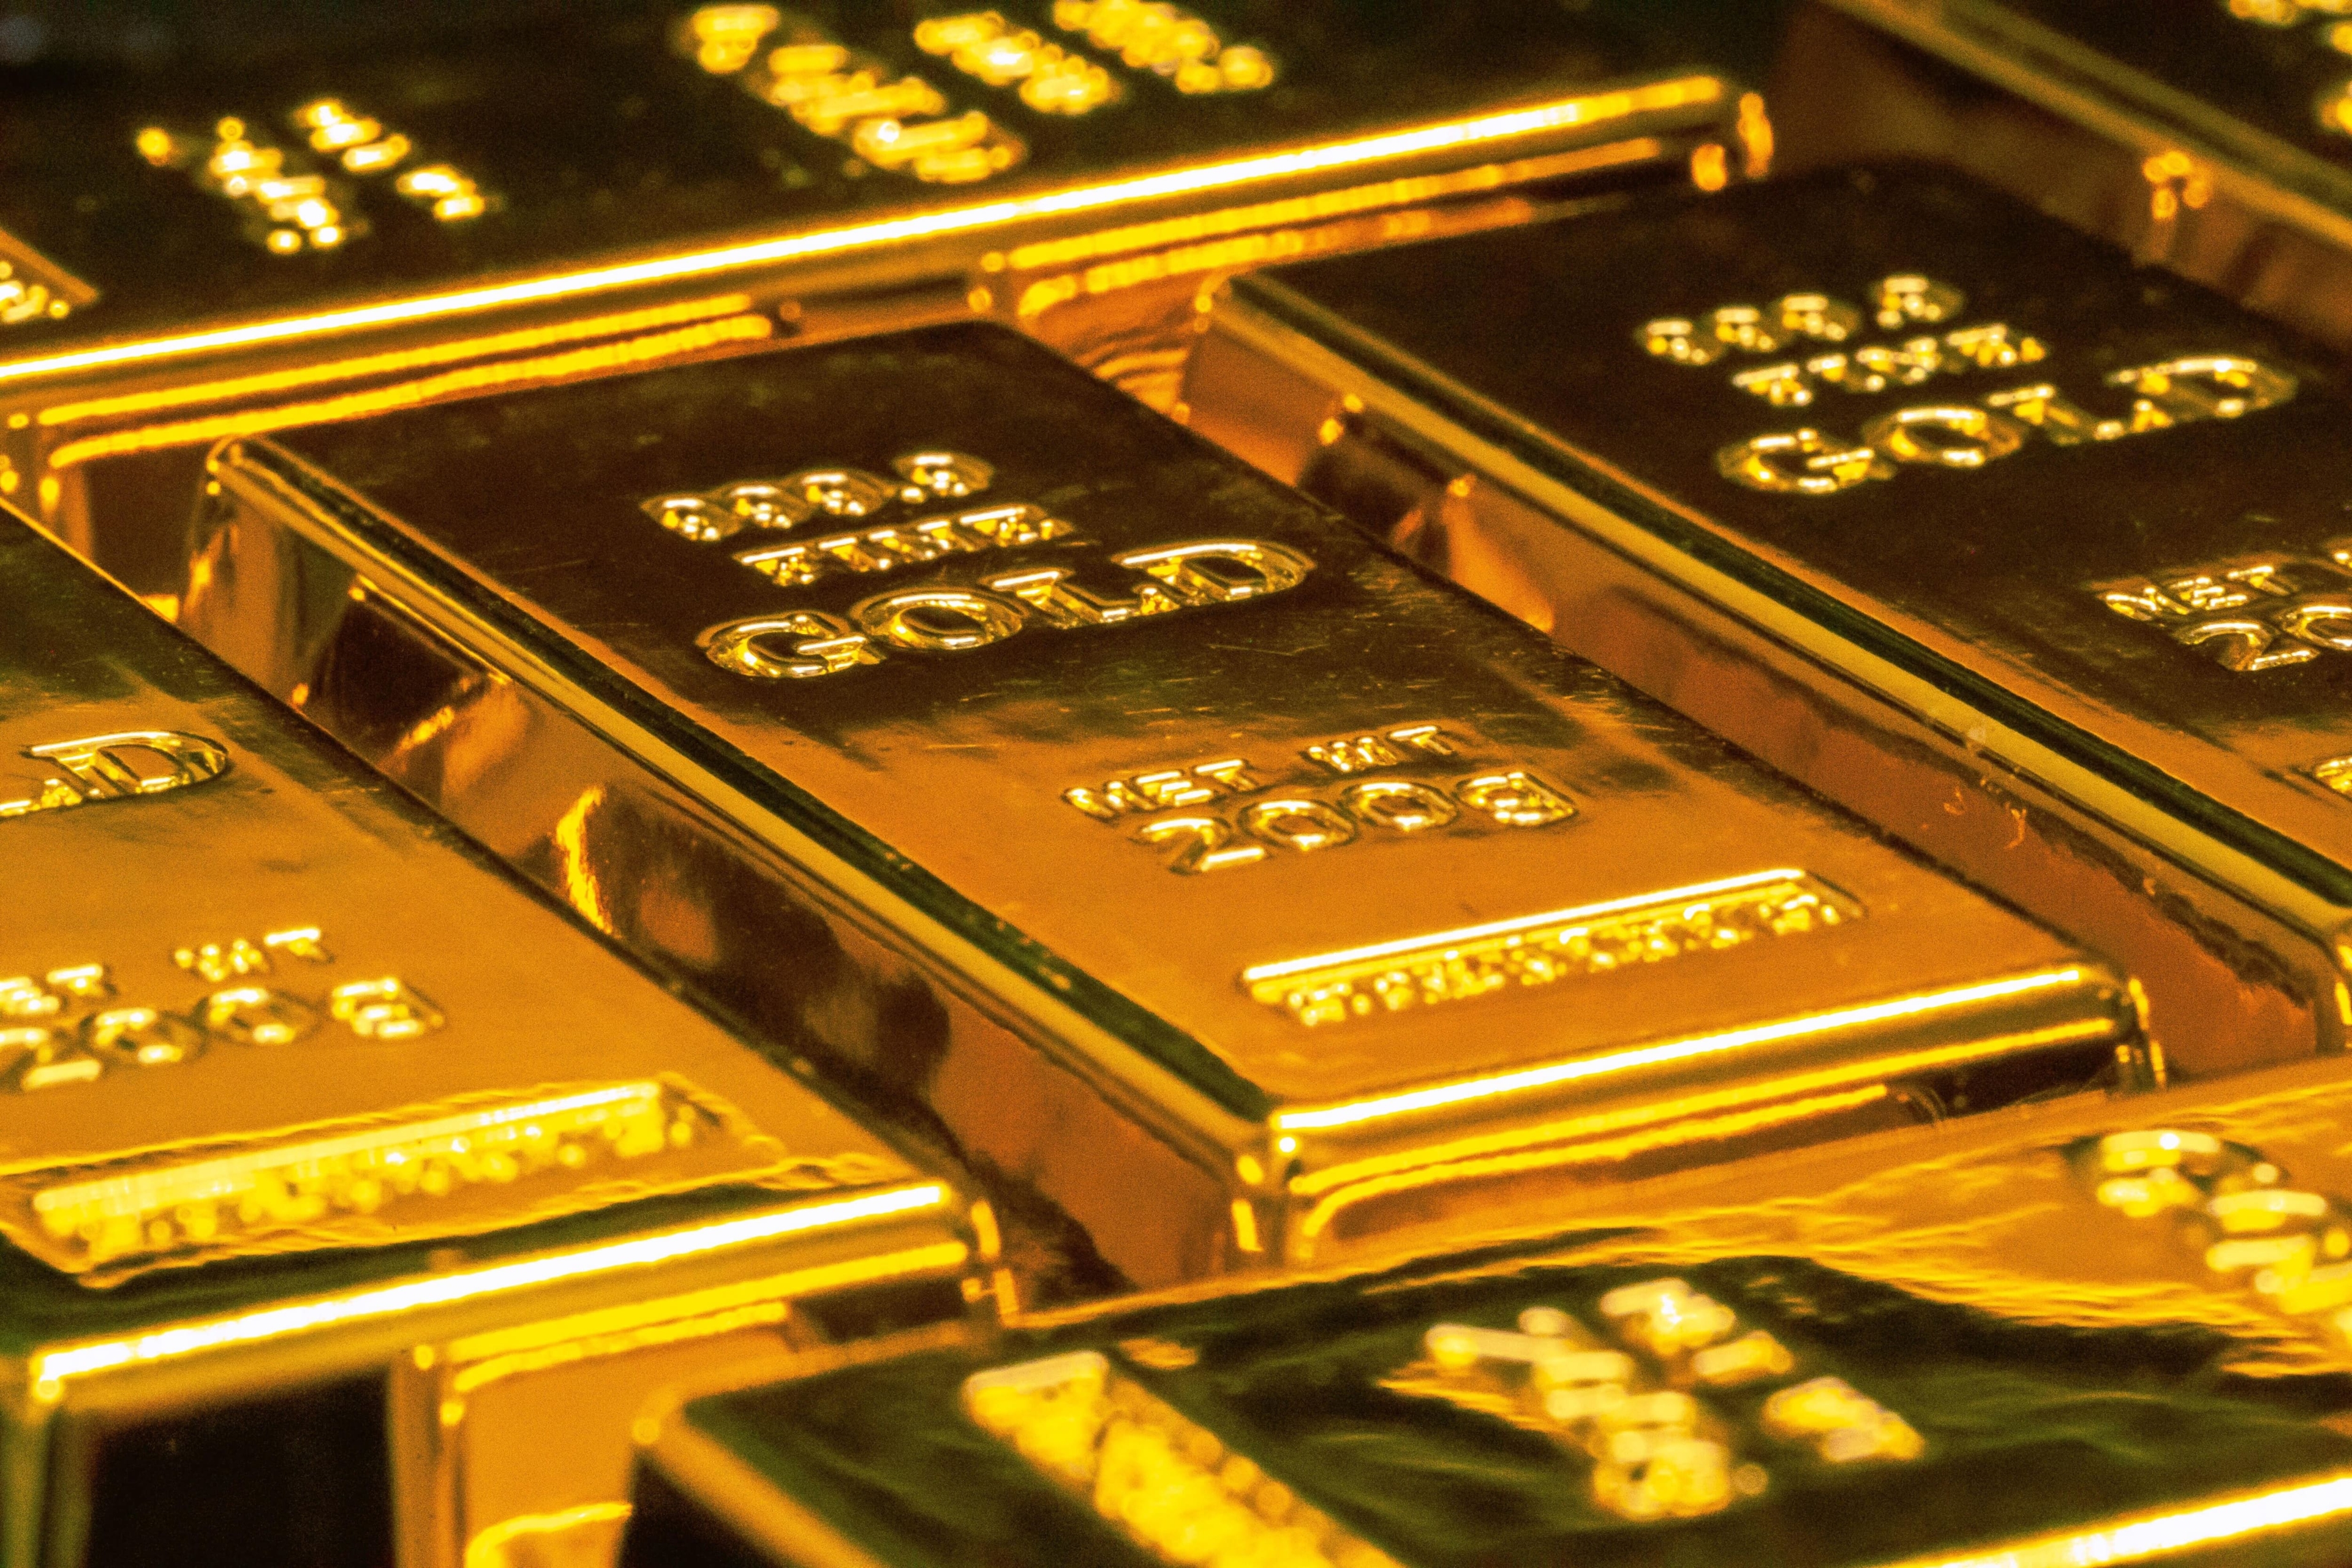 2022 has definitely given a boost in market participants' confidence w.r.t gold and silver.